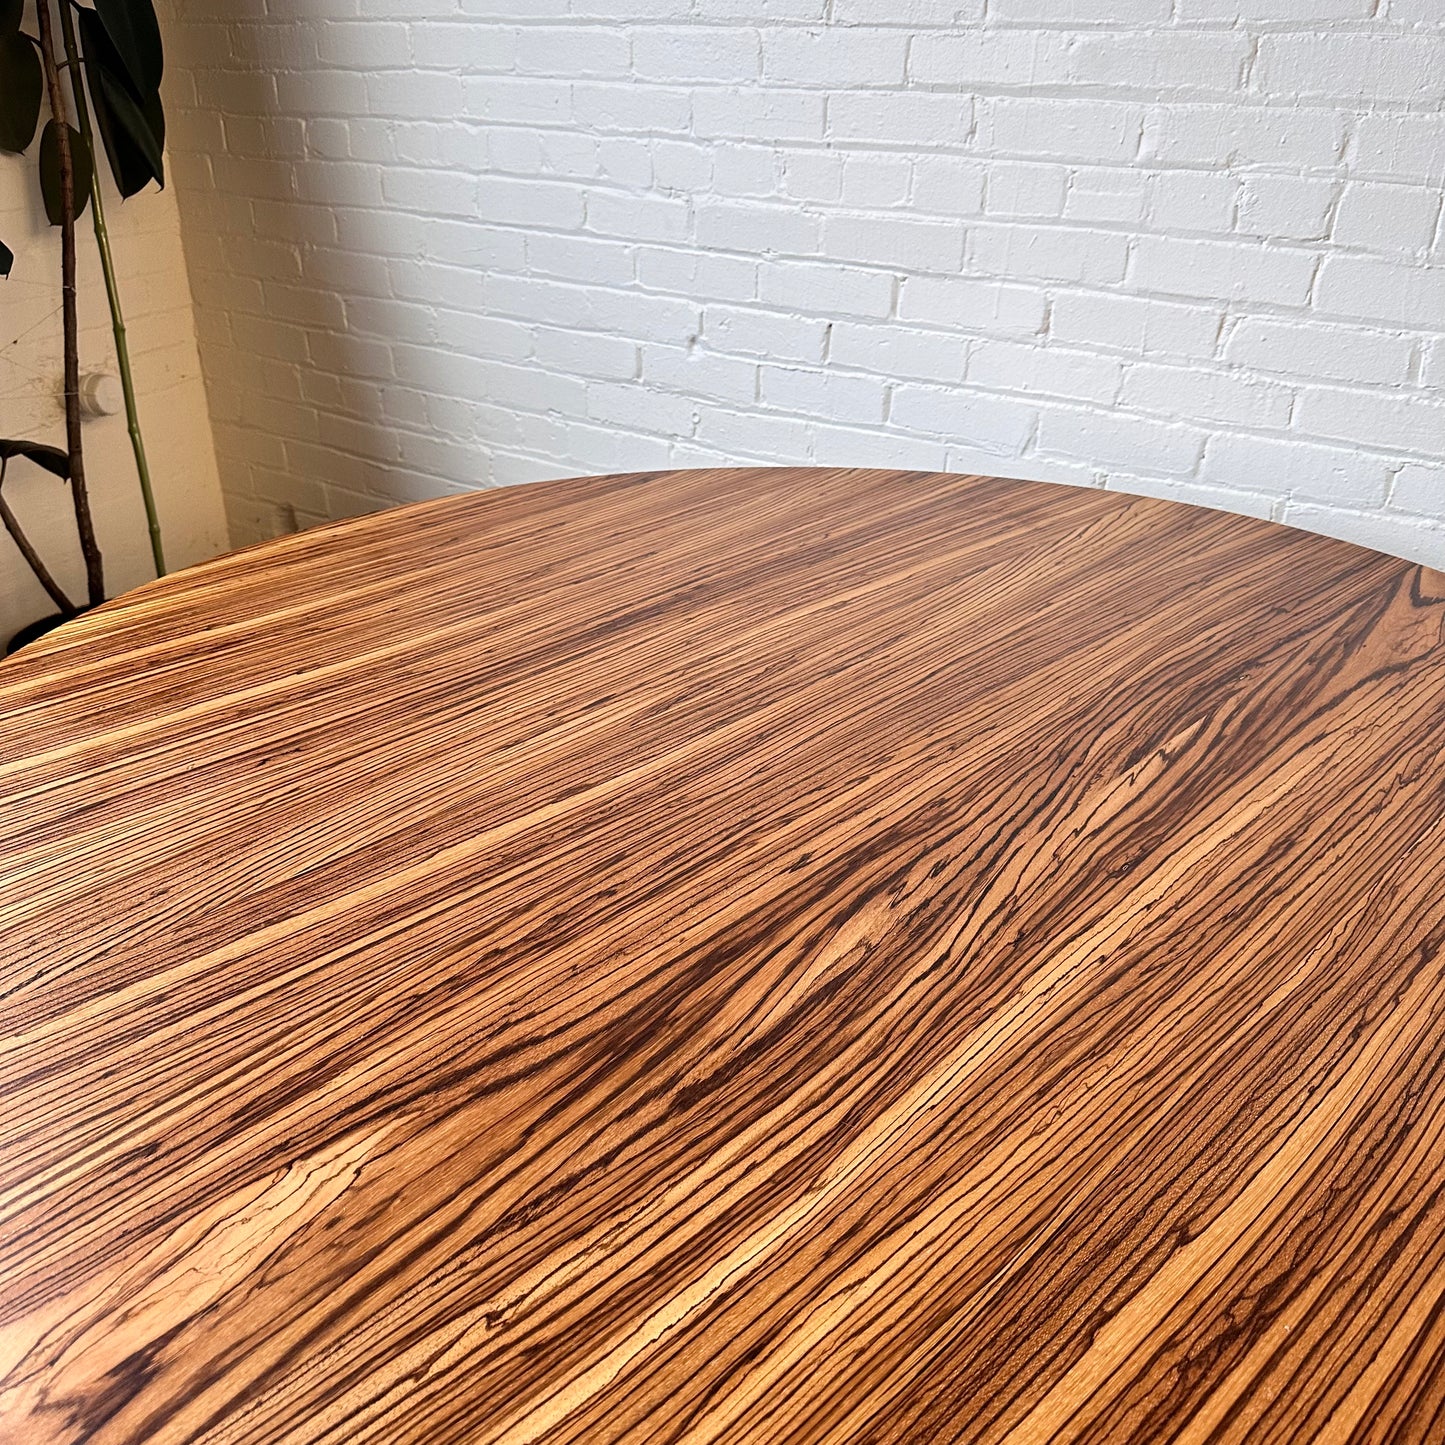 MODERN ROUND ZEBRA WOOD DINING TABLE WITH STEEL BASE